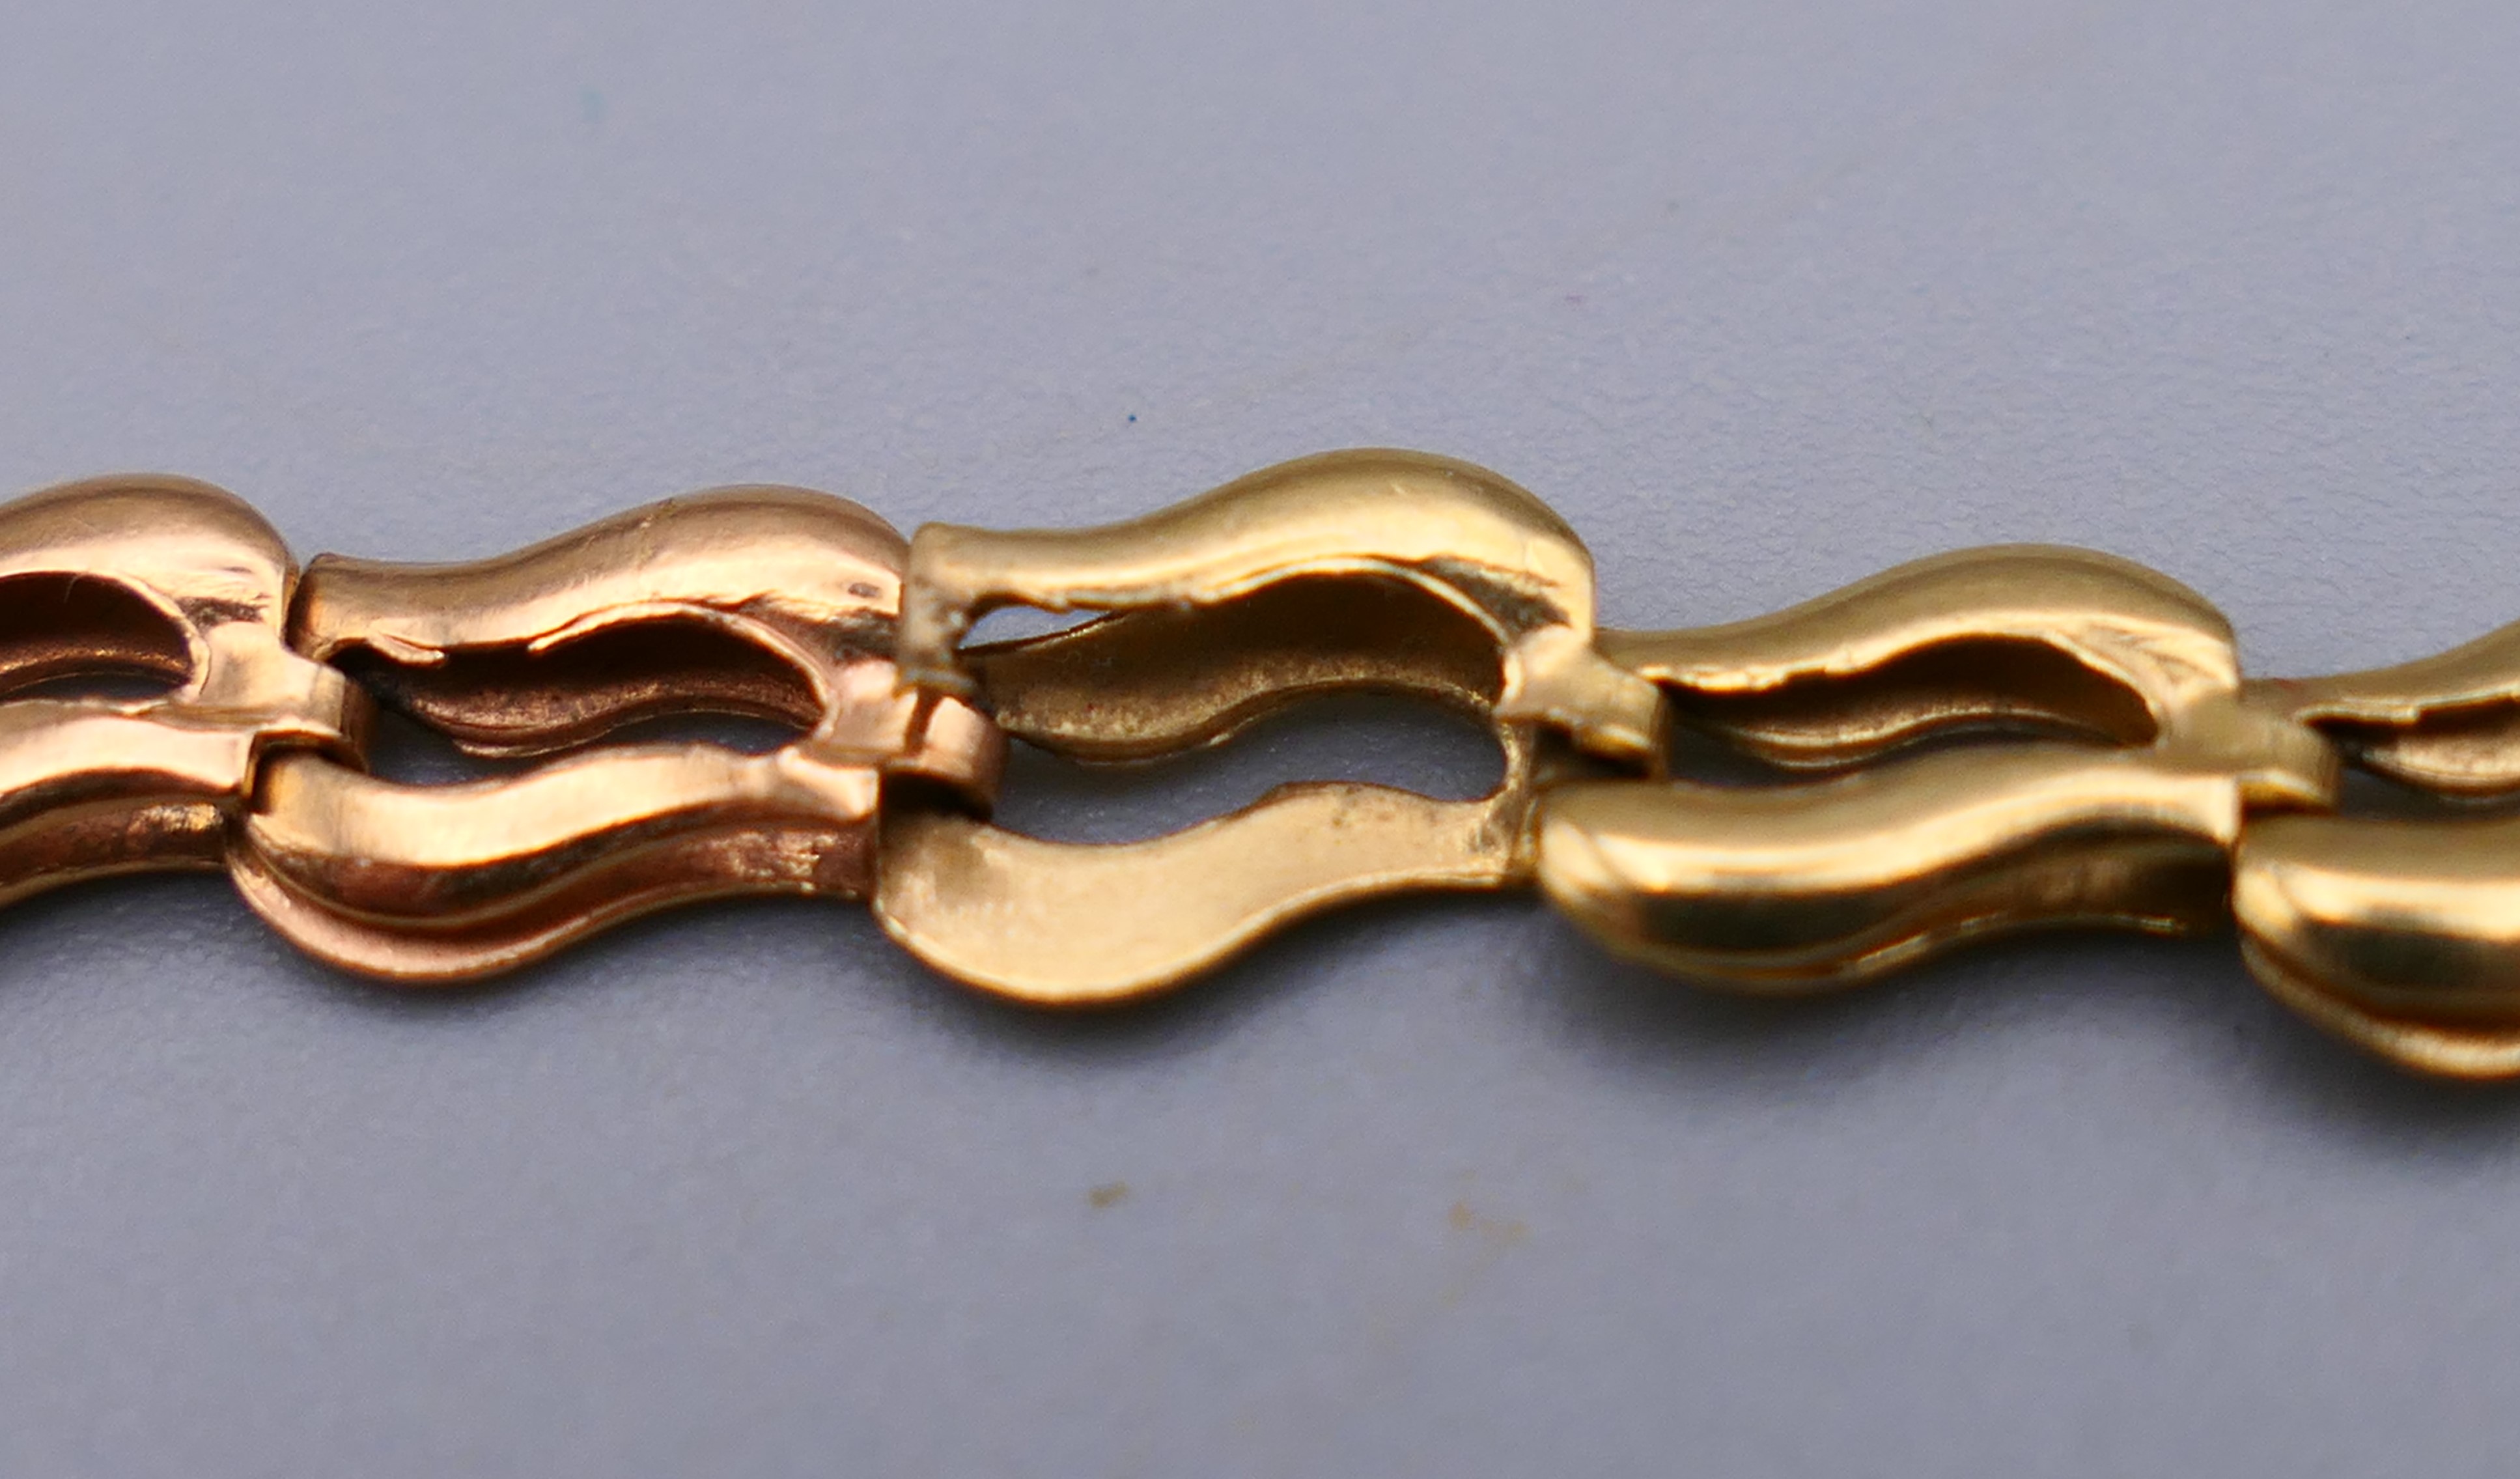 A 9 ct gold bracelet and another gold bracelet, possibly 18 ct gold. 19 cm long and 17 cm long. - Image 9 of 9